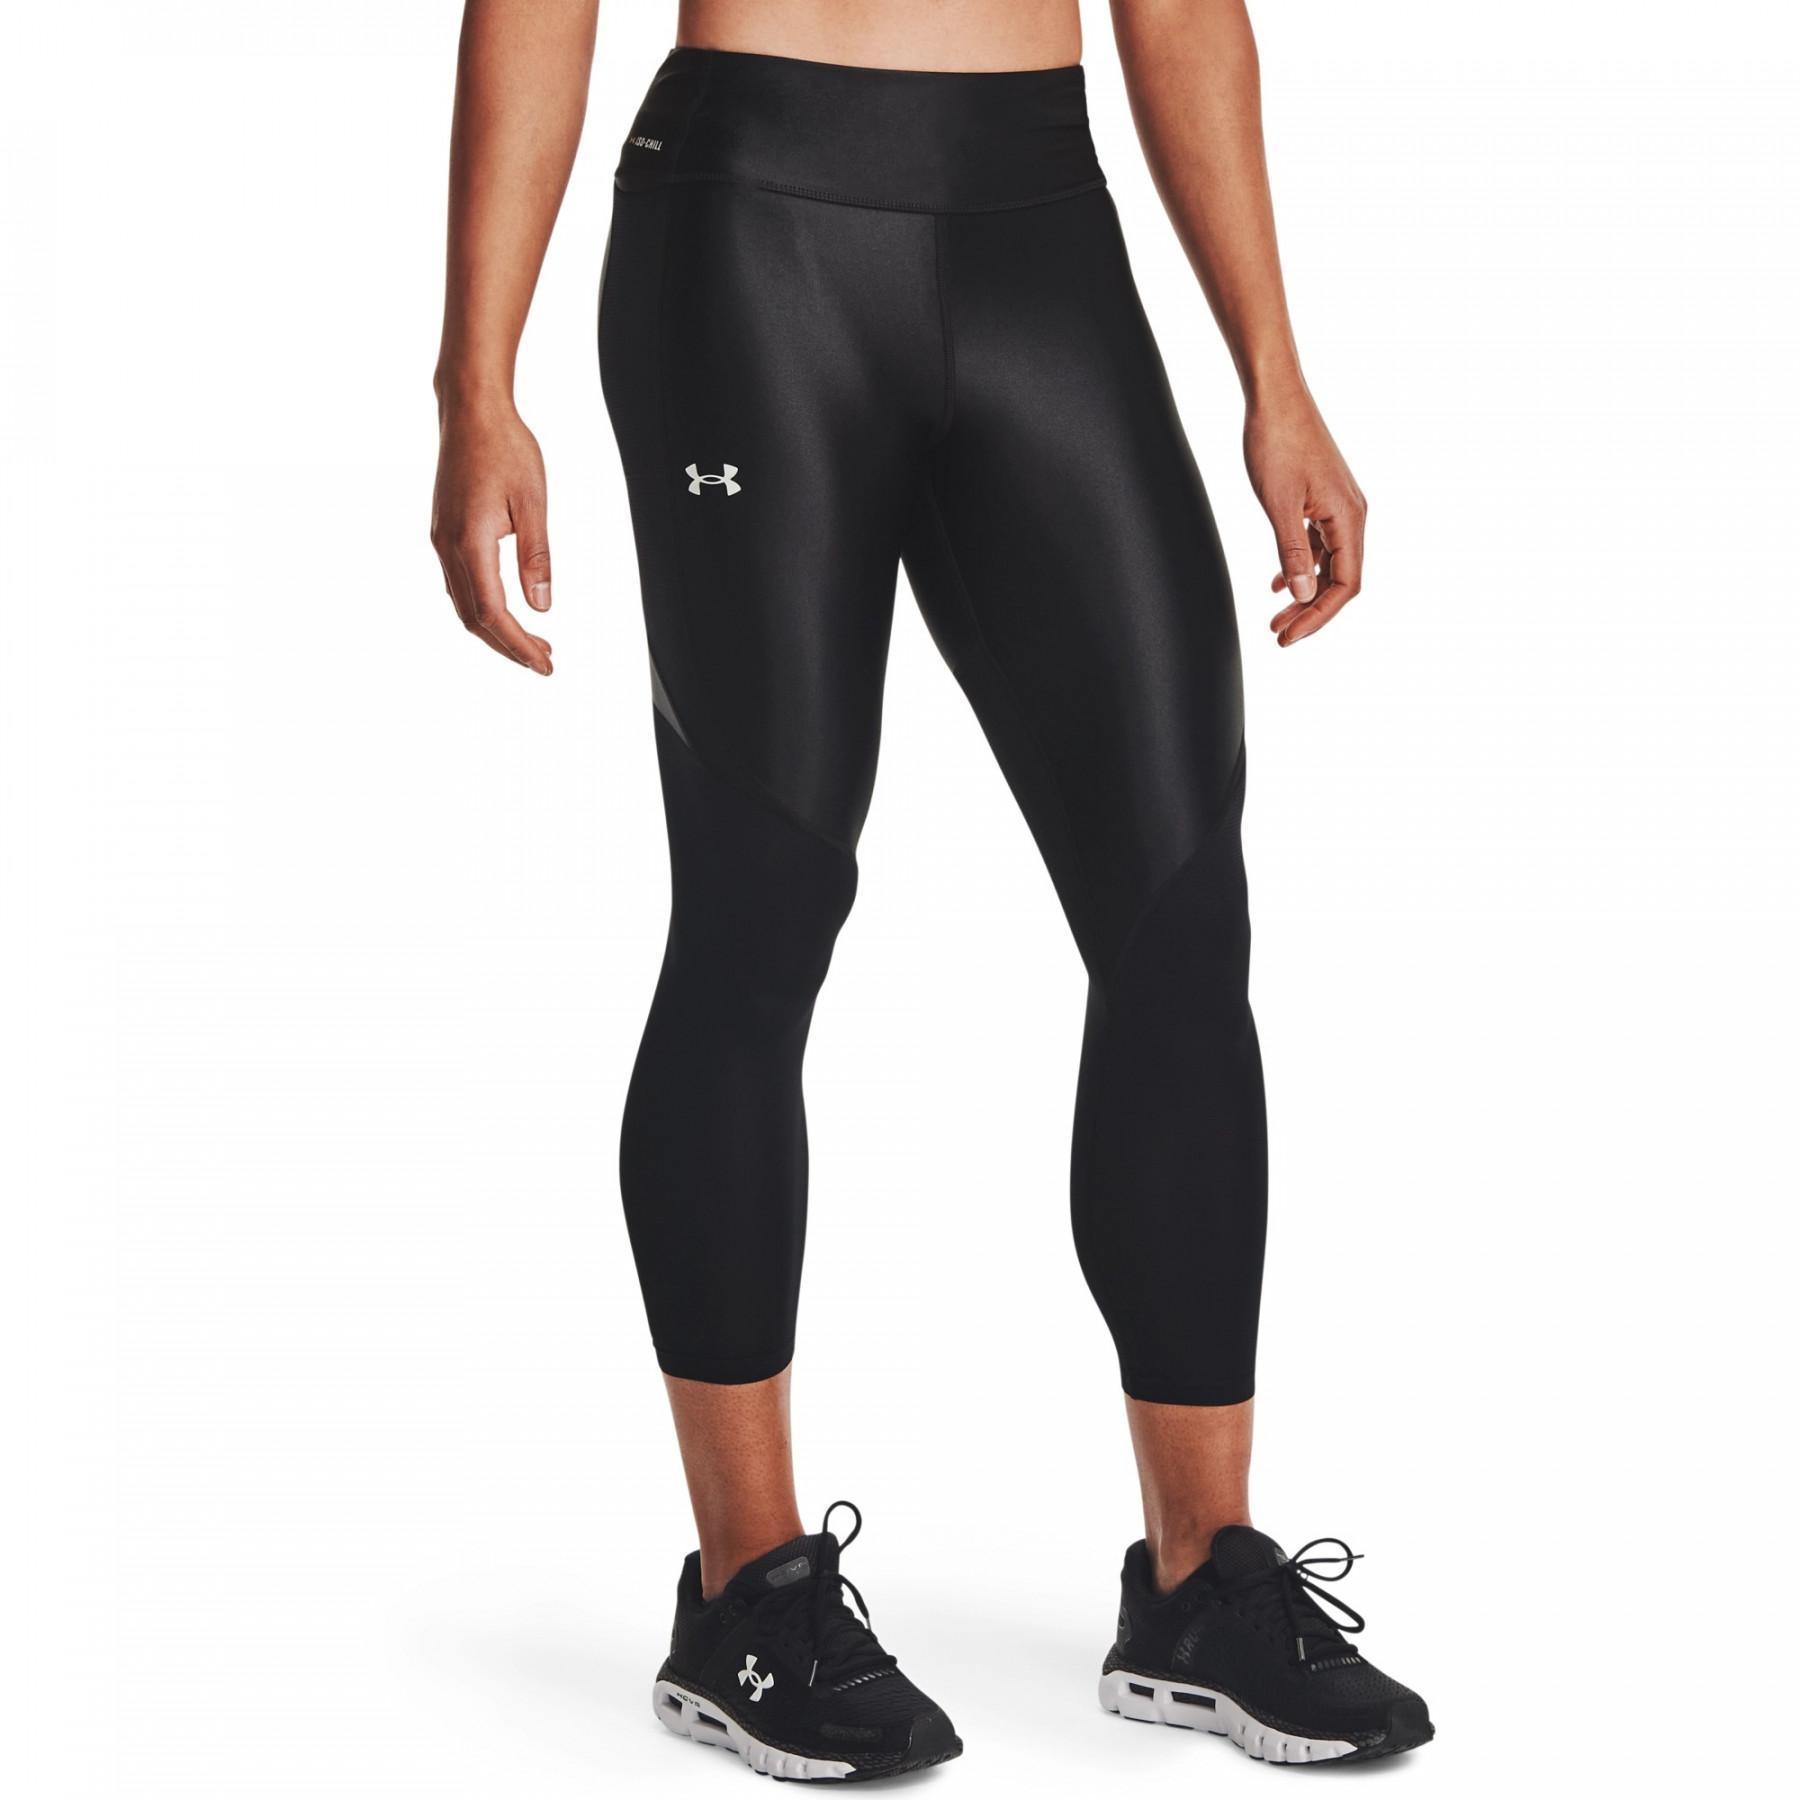 Leggings de mujer Under Armour Iso-Chill